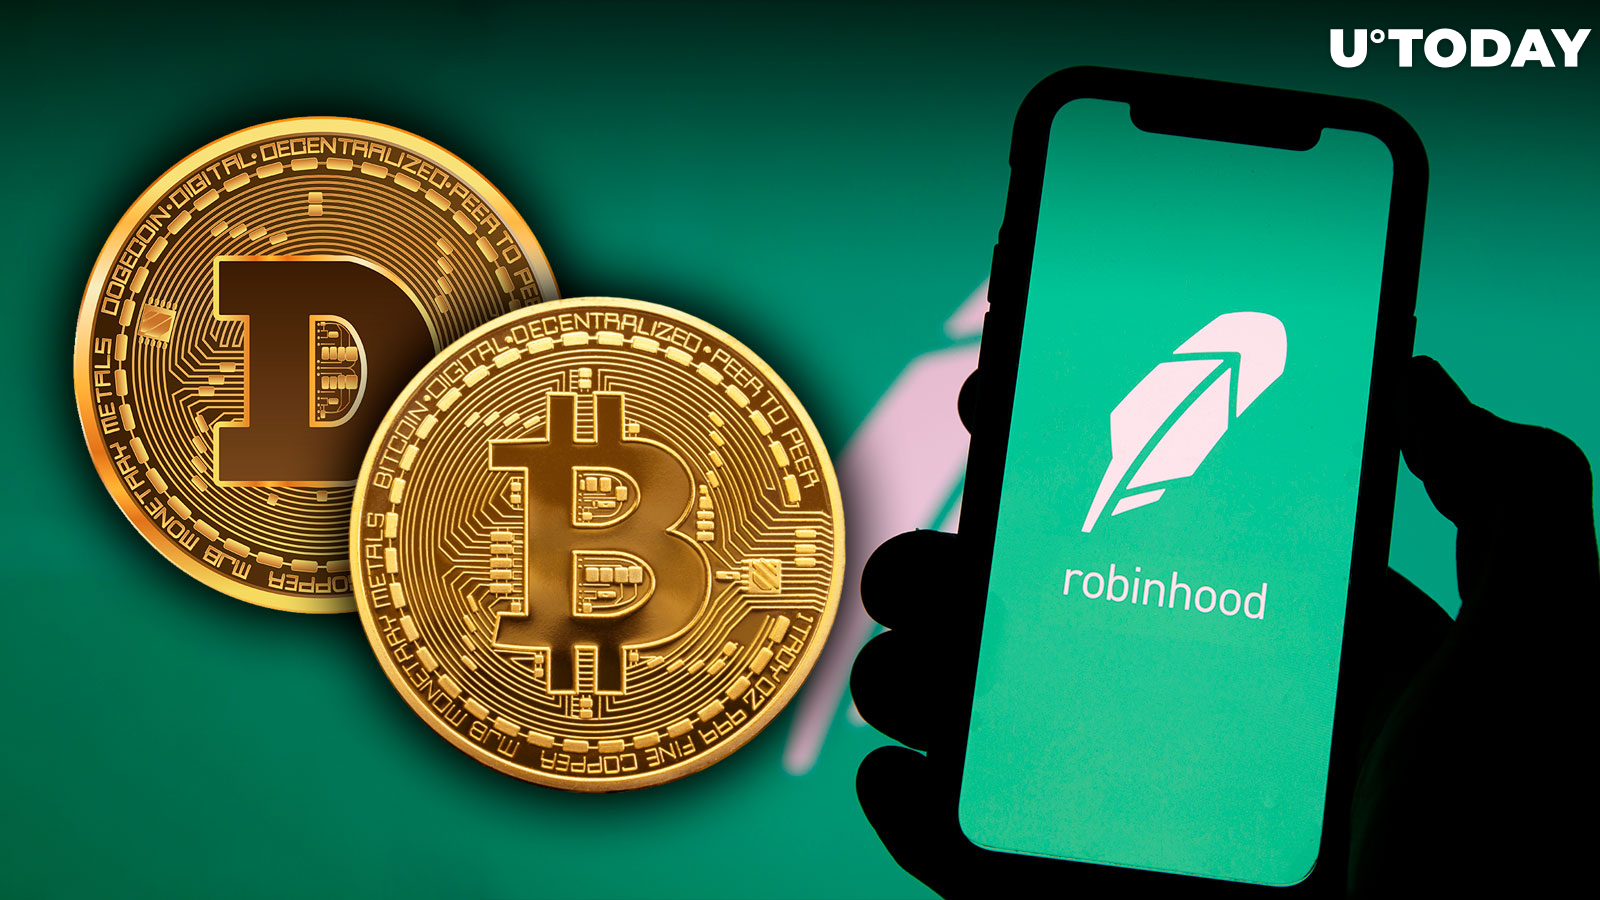 Dogecoin and Bitcoin Get Boost from Robinhood 